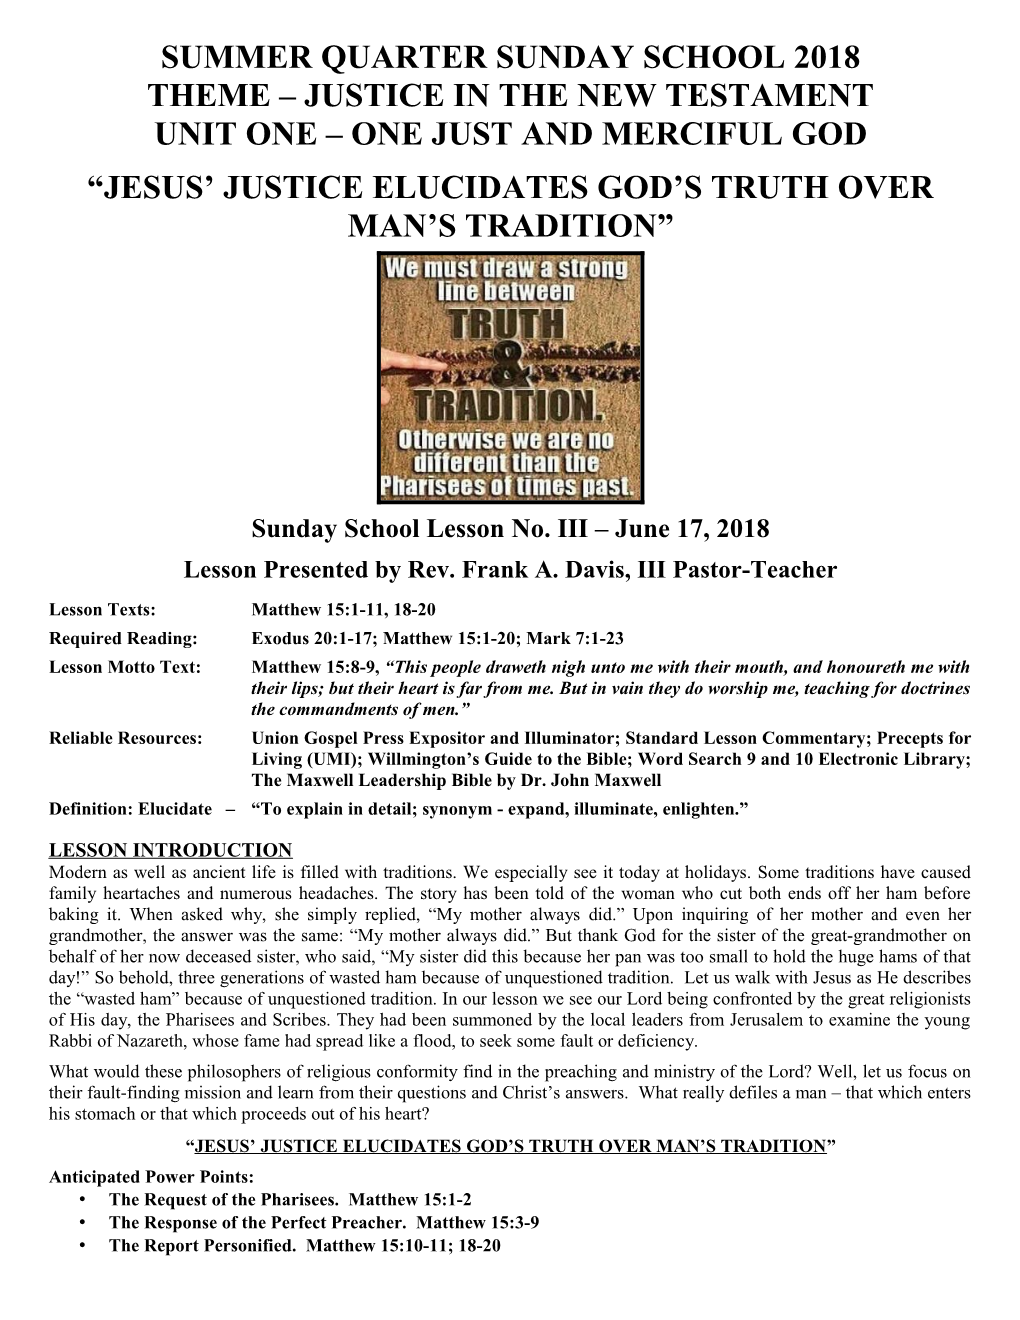 Theme Justice in the New Testament